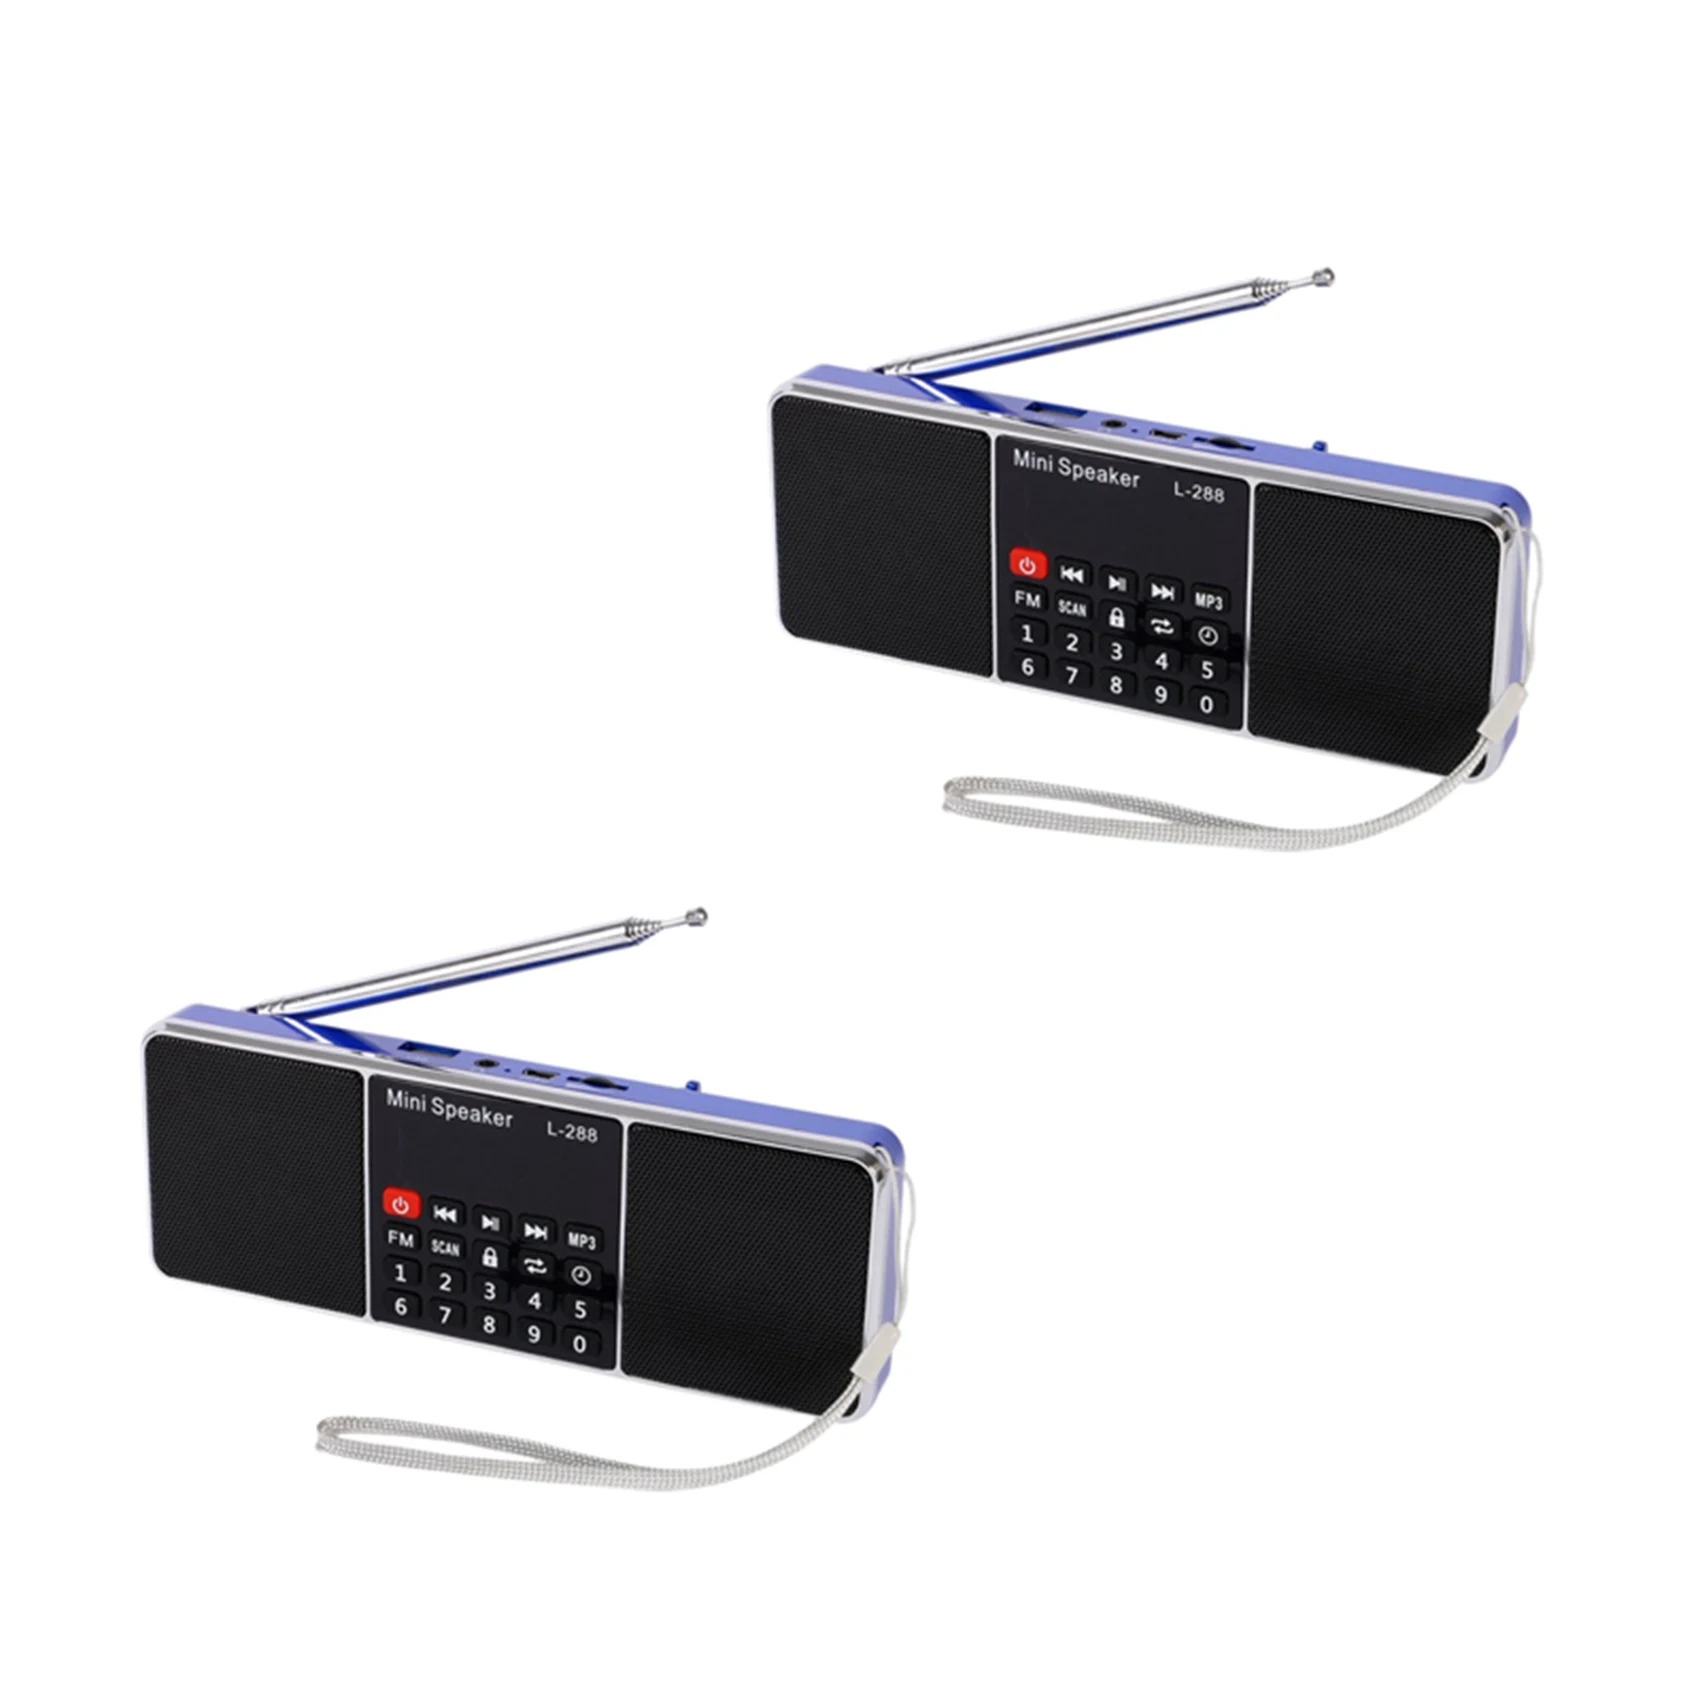 

2X Rechargeable Stereo L-288 FM Radio Speaker LCD Screen Support TF Card USB Disk MP3 Music Player Loudspeaker（Blue）